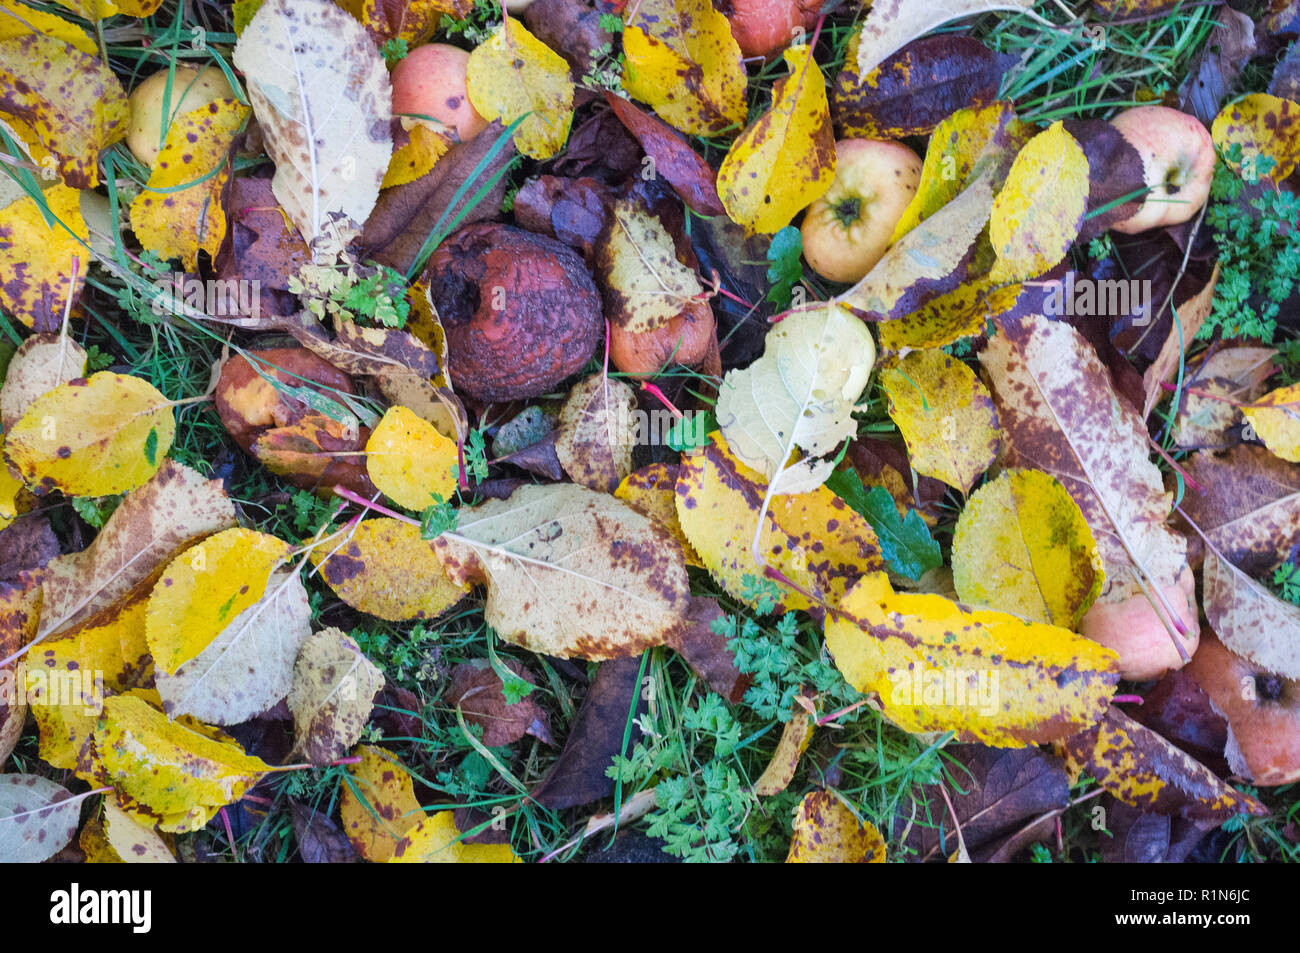 Colourful autumn leaves and rotting apples on the ground in an orchard Stock Photo